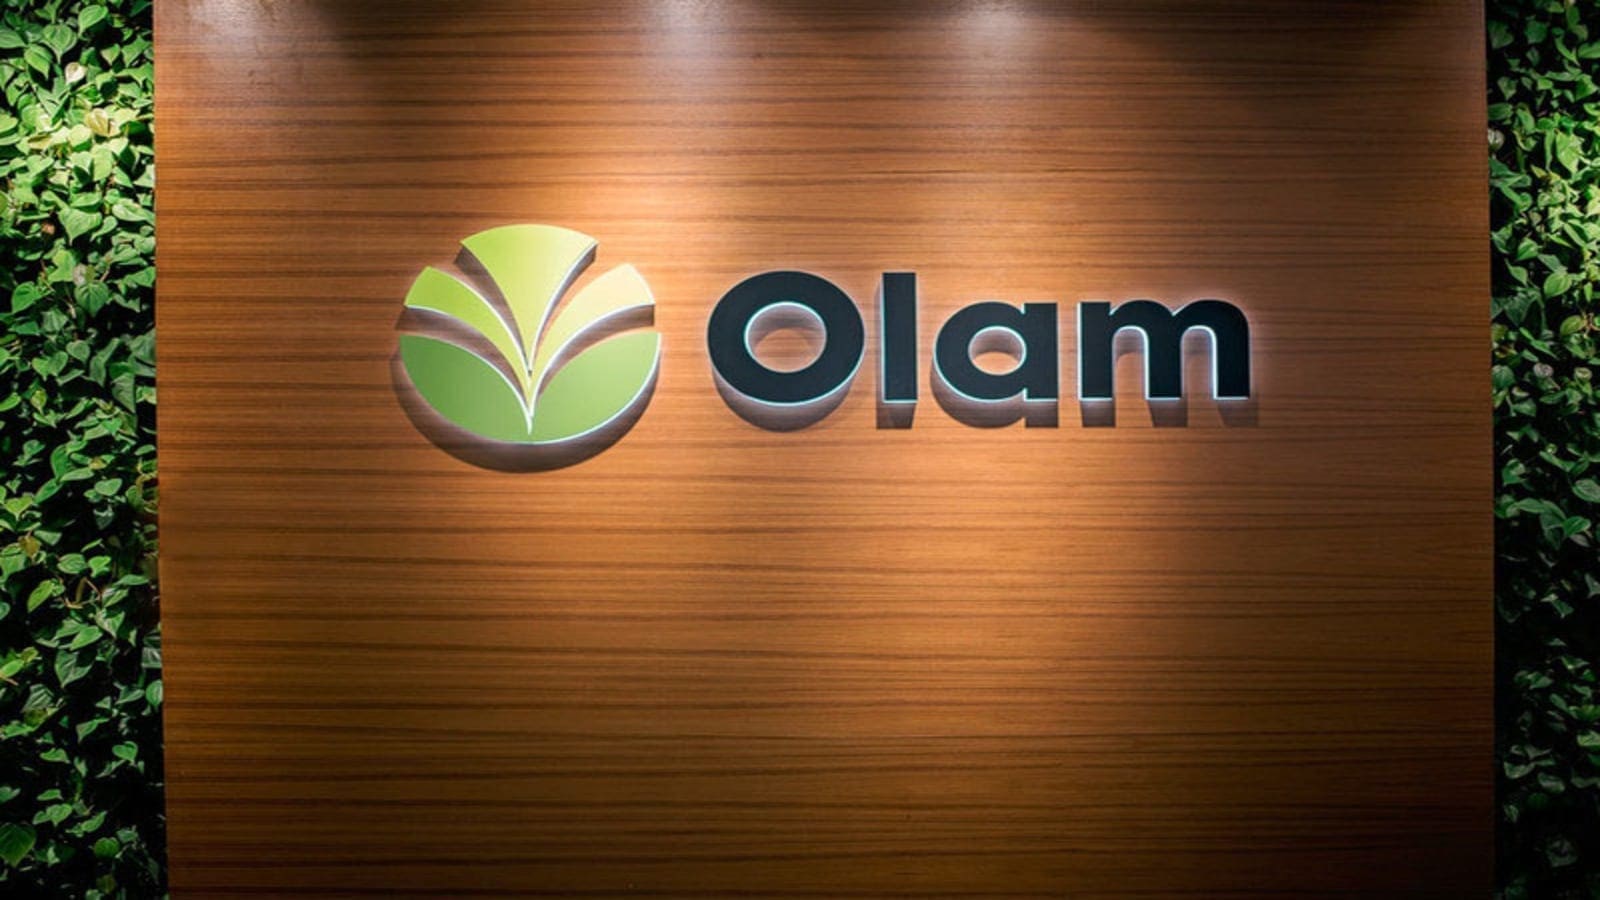 Olam seeks to raise US$188m from Singapore’s debt market even as it extends its food prize application deadline